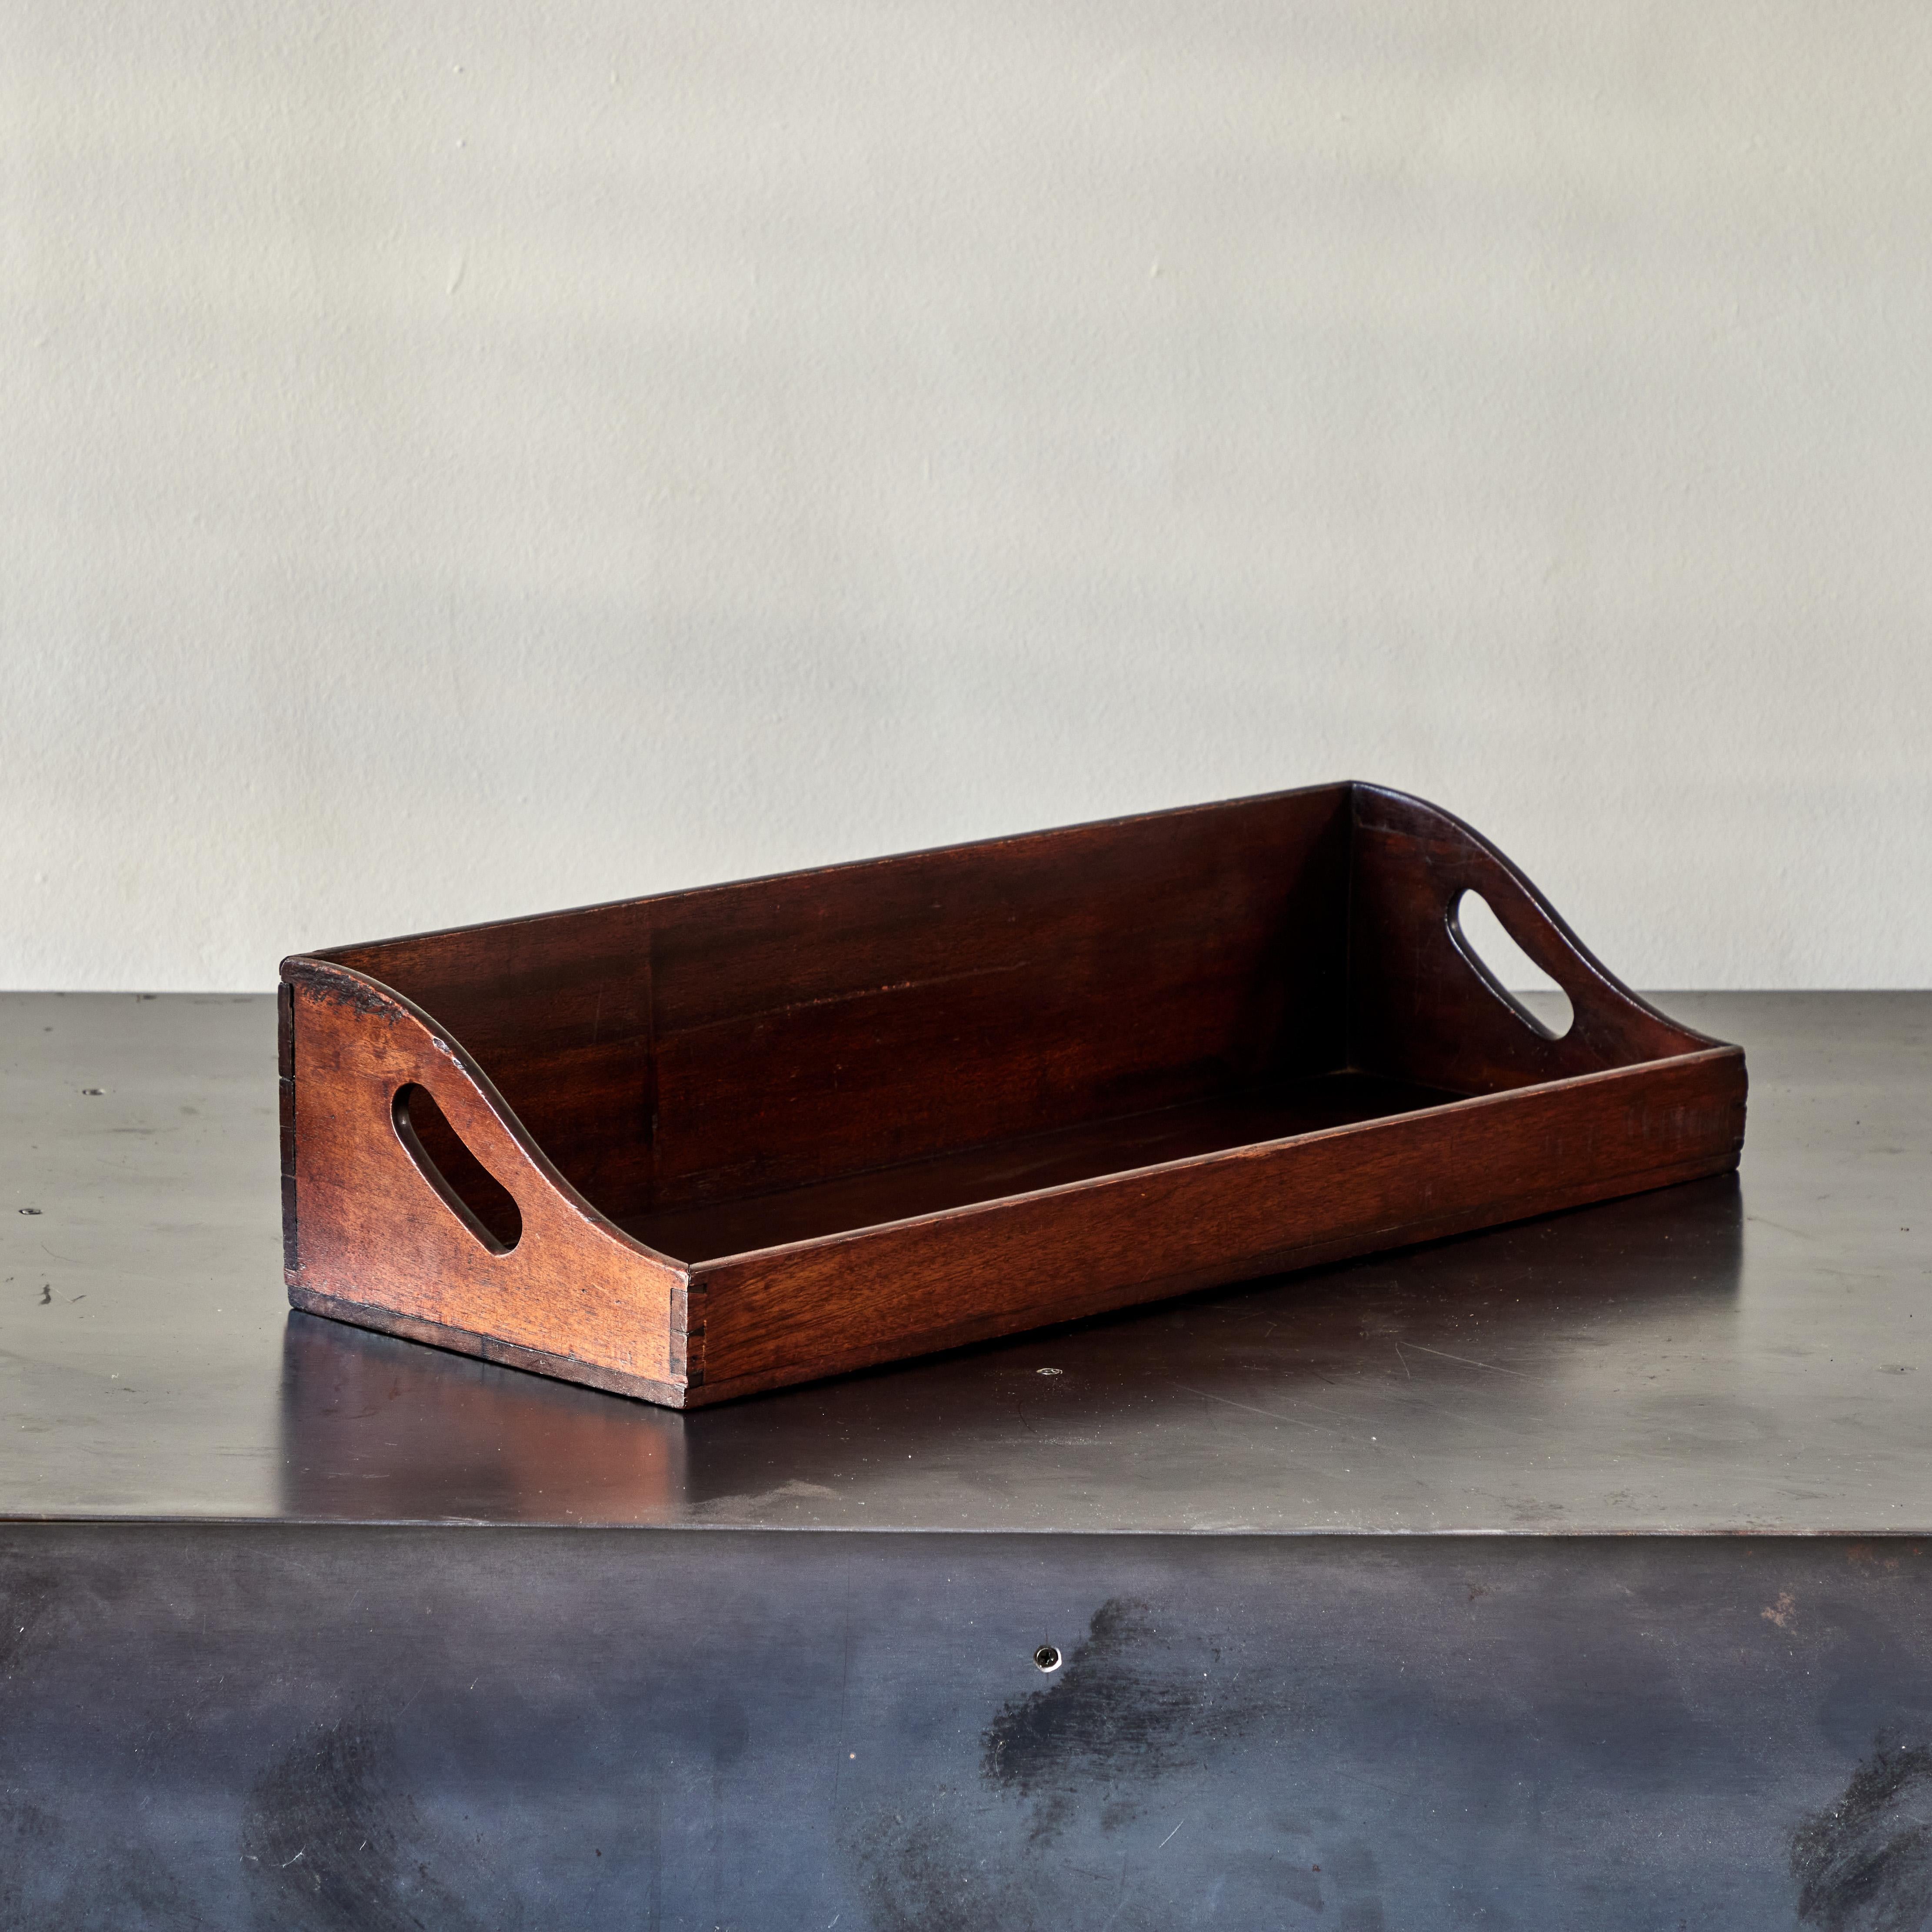 19th-century English mahogany library tray with handles. Perfect for organizing or display, this handsome decorative accent has a deep rich patina and scholarly flair. 

England, circa 1860

Dimensions: 26W x 10D x 6H.